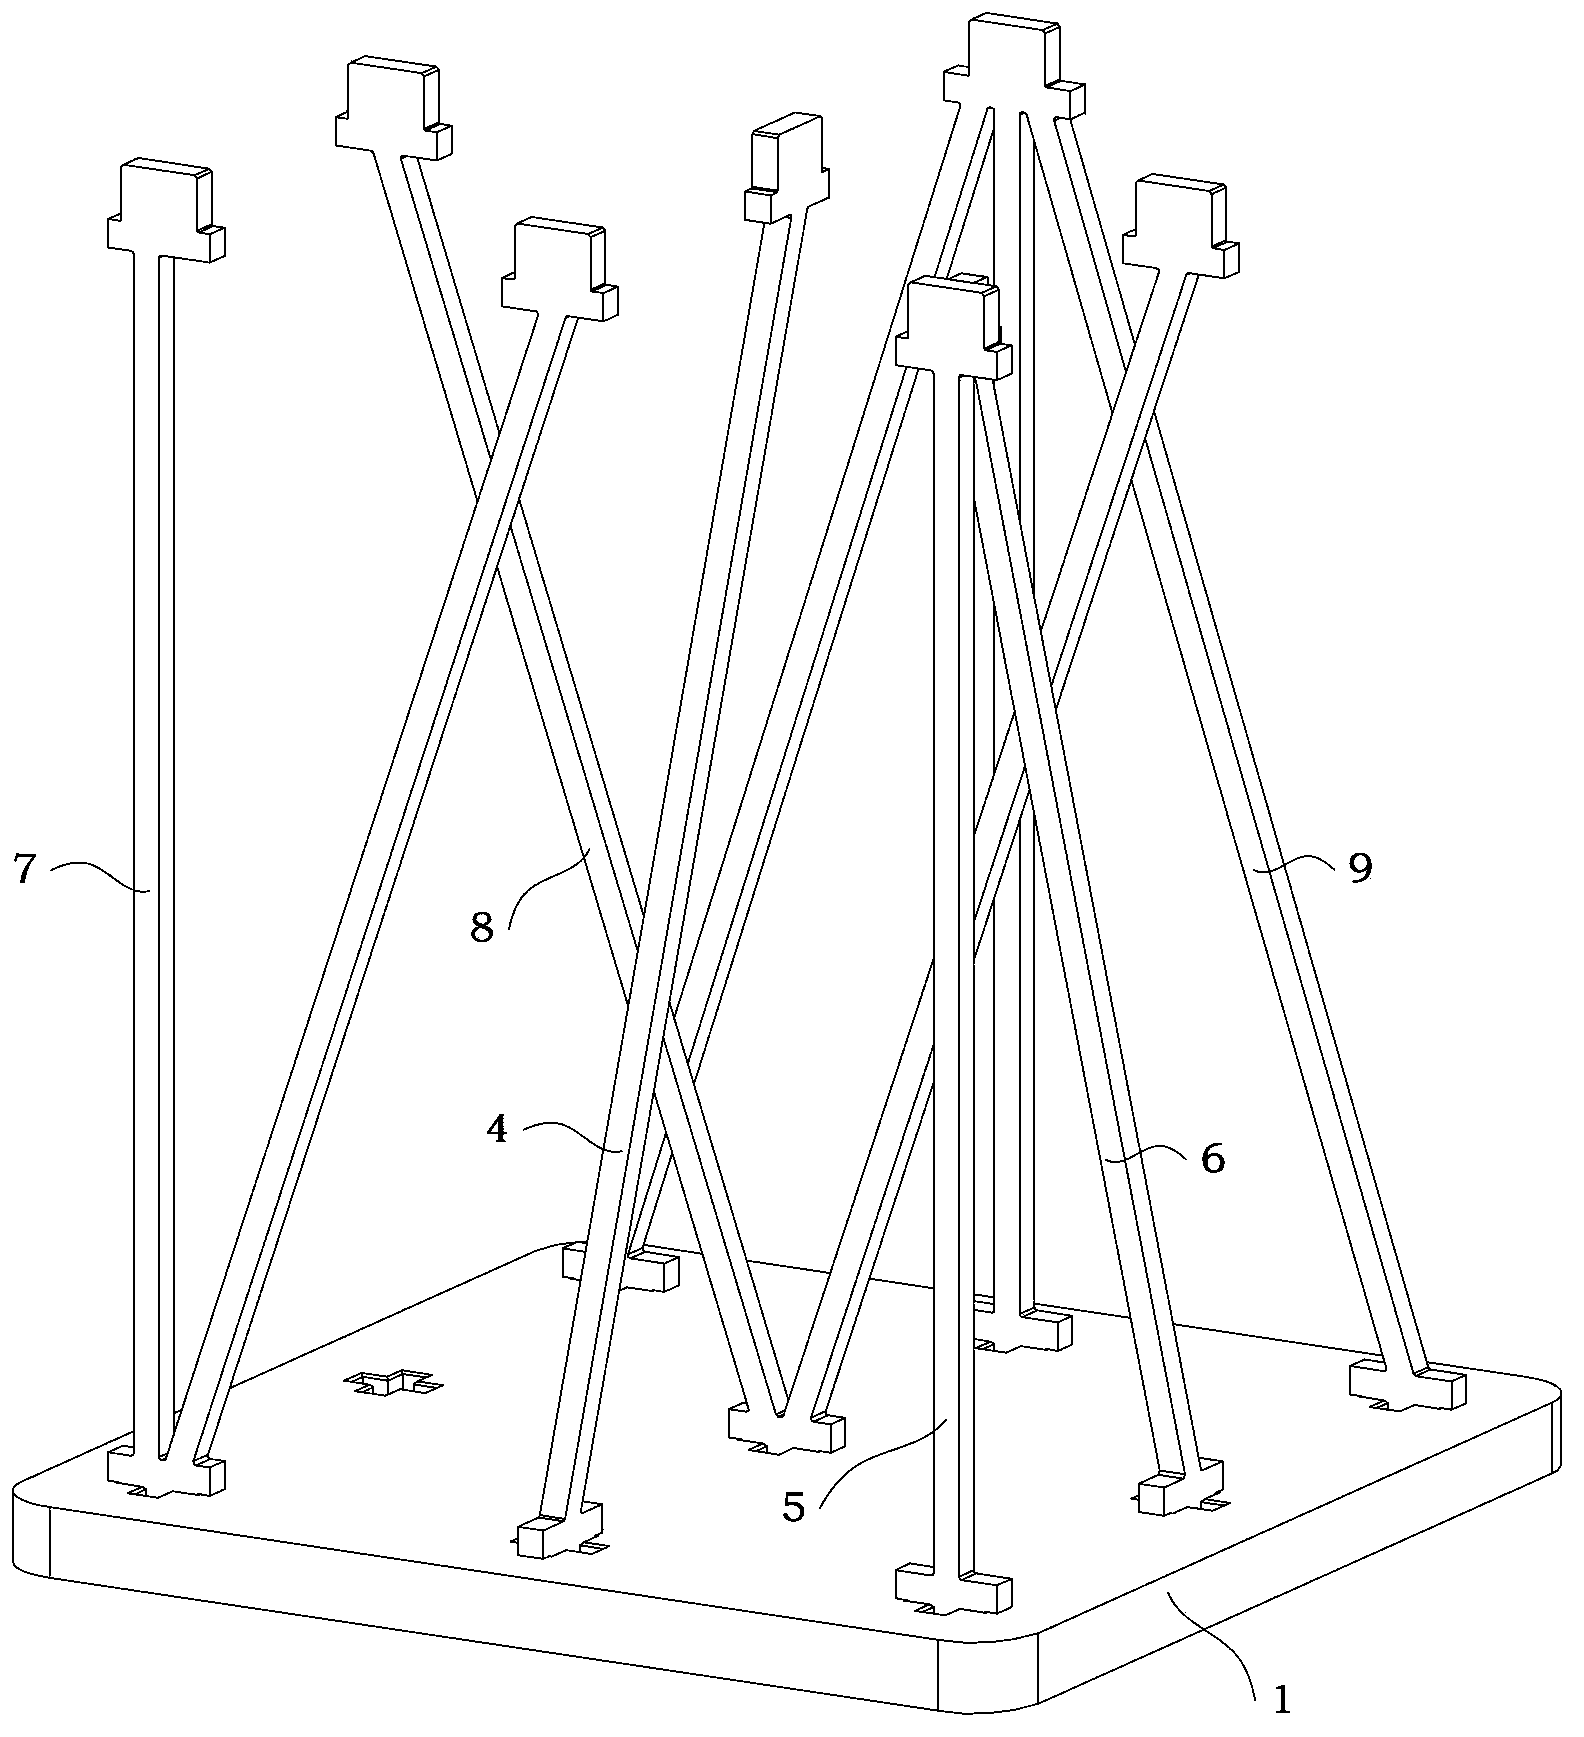 A reconfigurable flexible teaching aid used to demonstrate the dual relationship between degrees of freedom and constraints in the teaching of mechanical principles